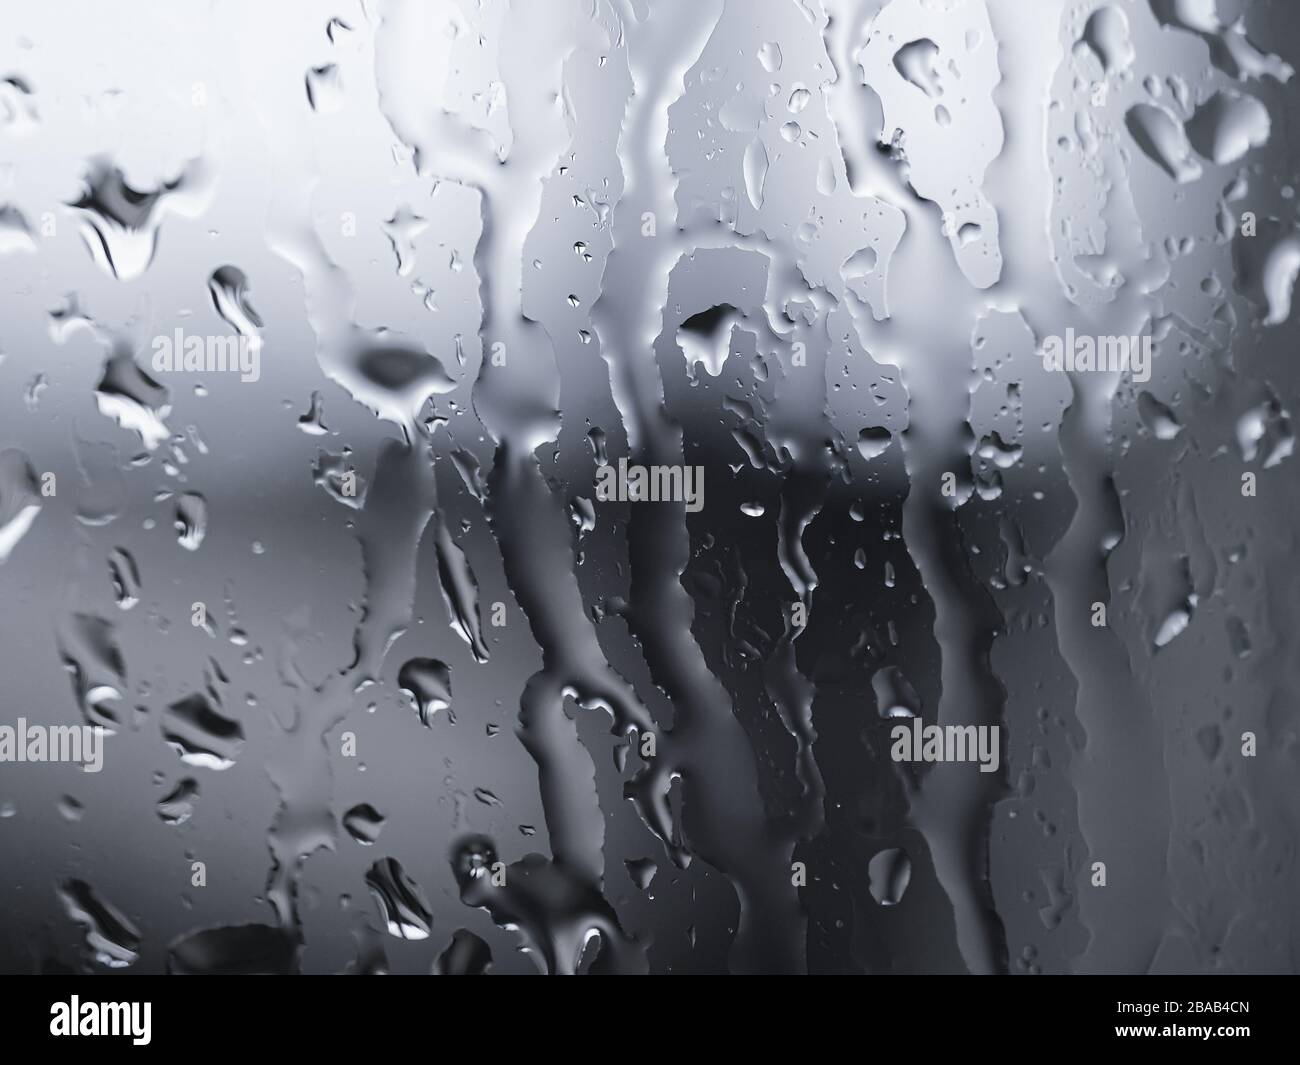 Rain water drops on glass over blur silver background,abstract texture pattern Stock Photo